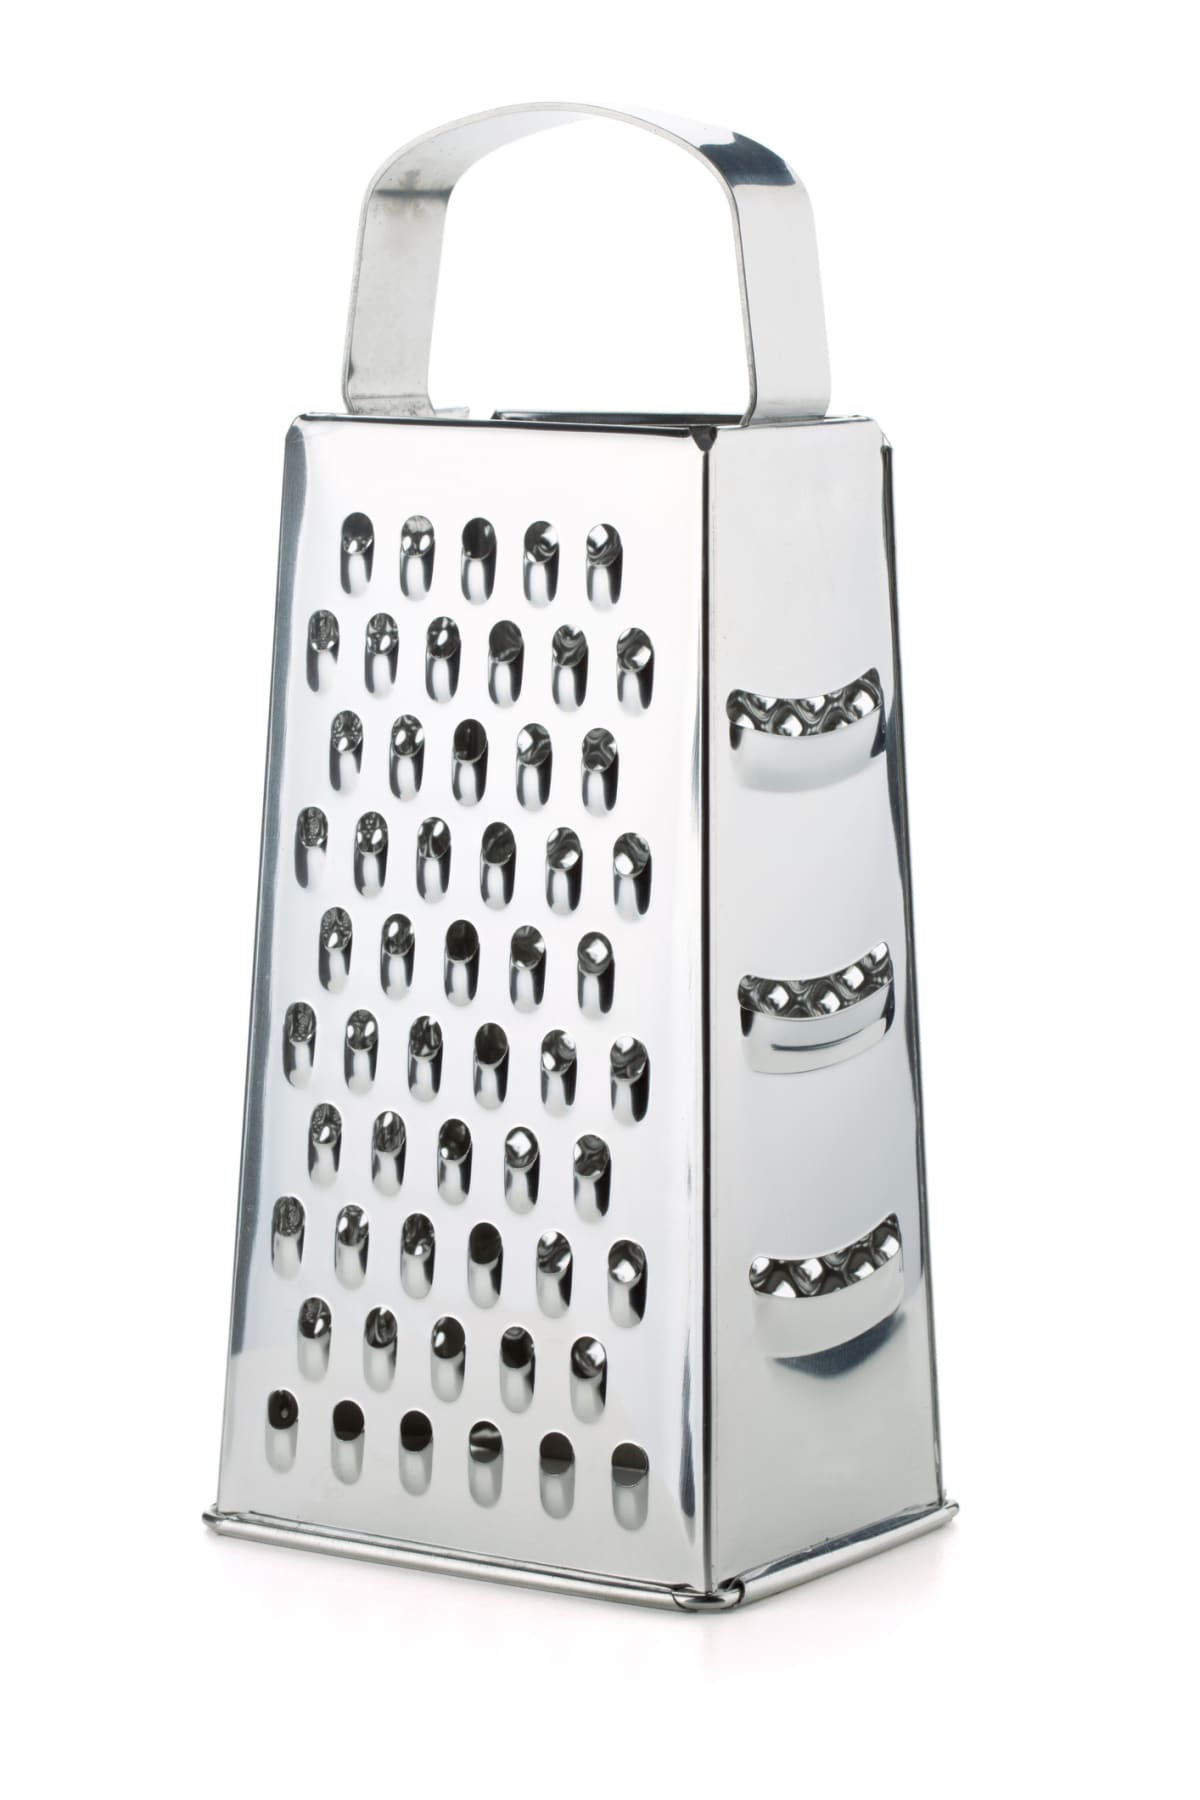 A metal box grater on a white background